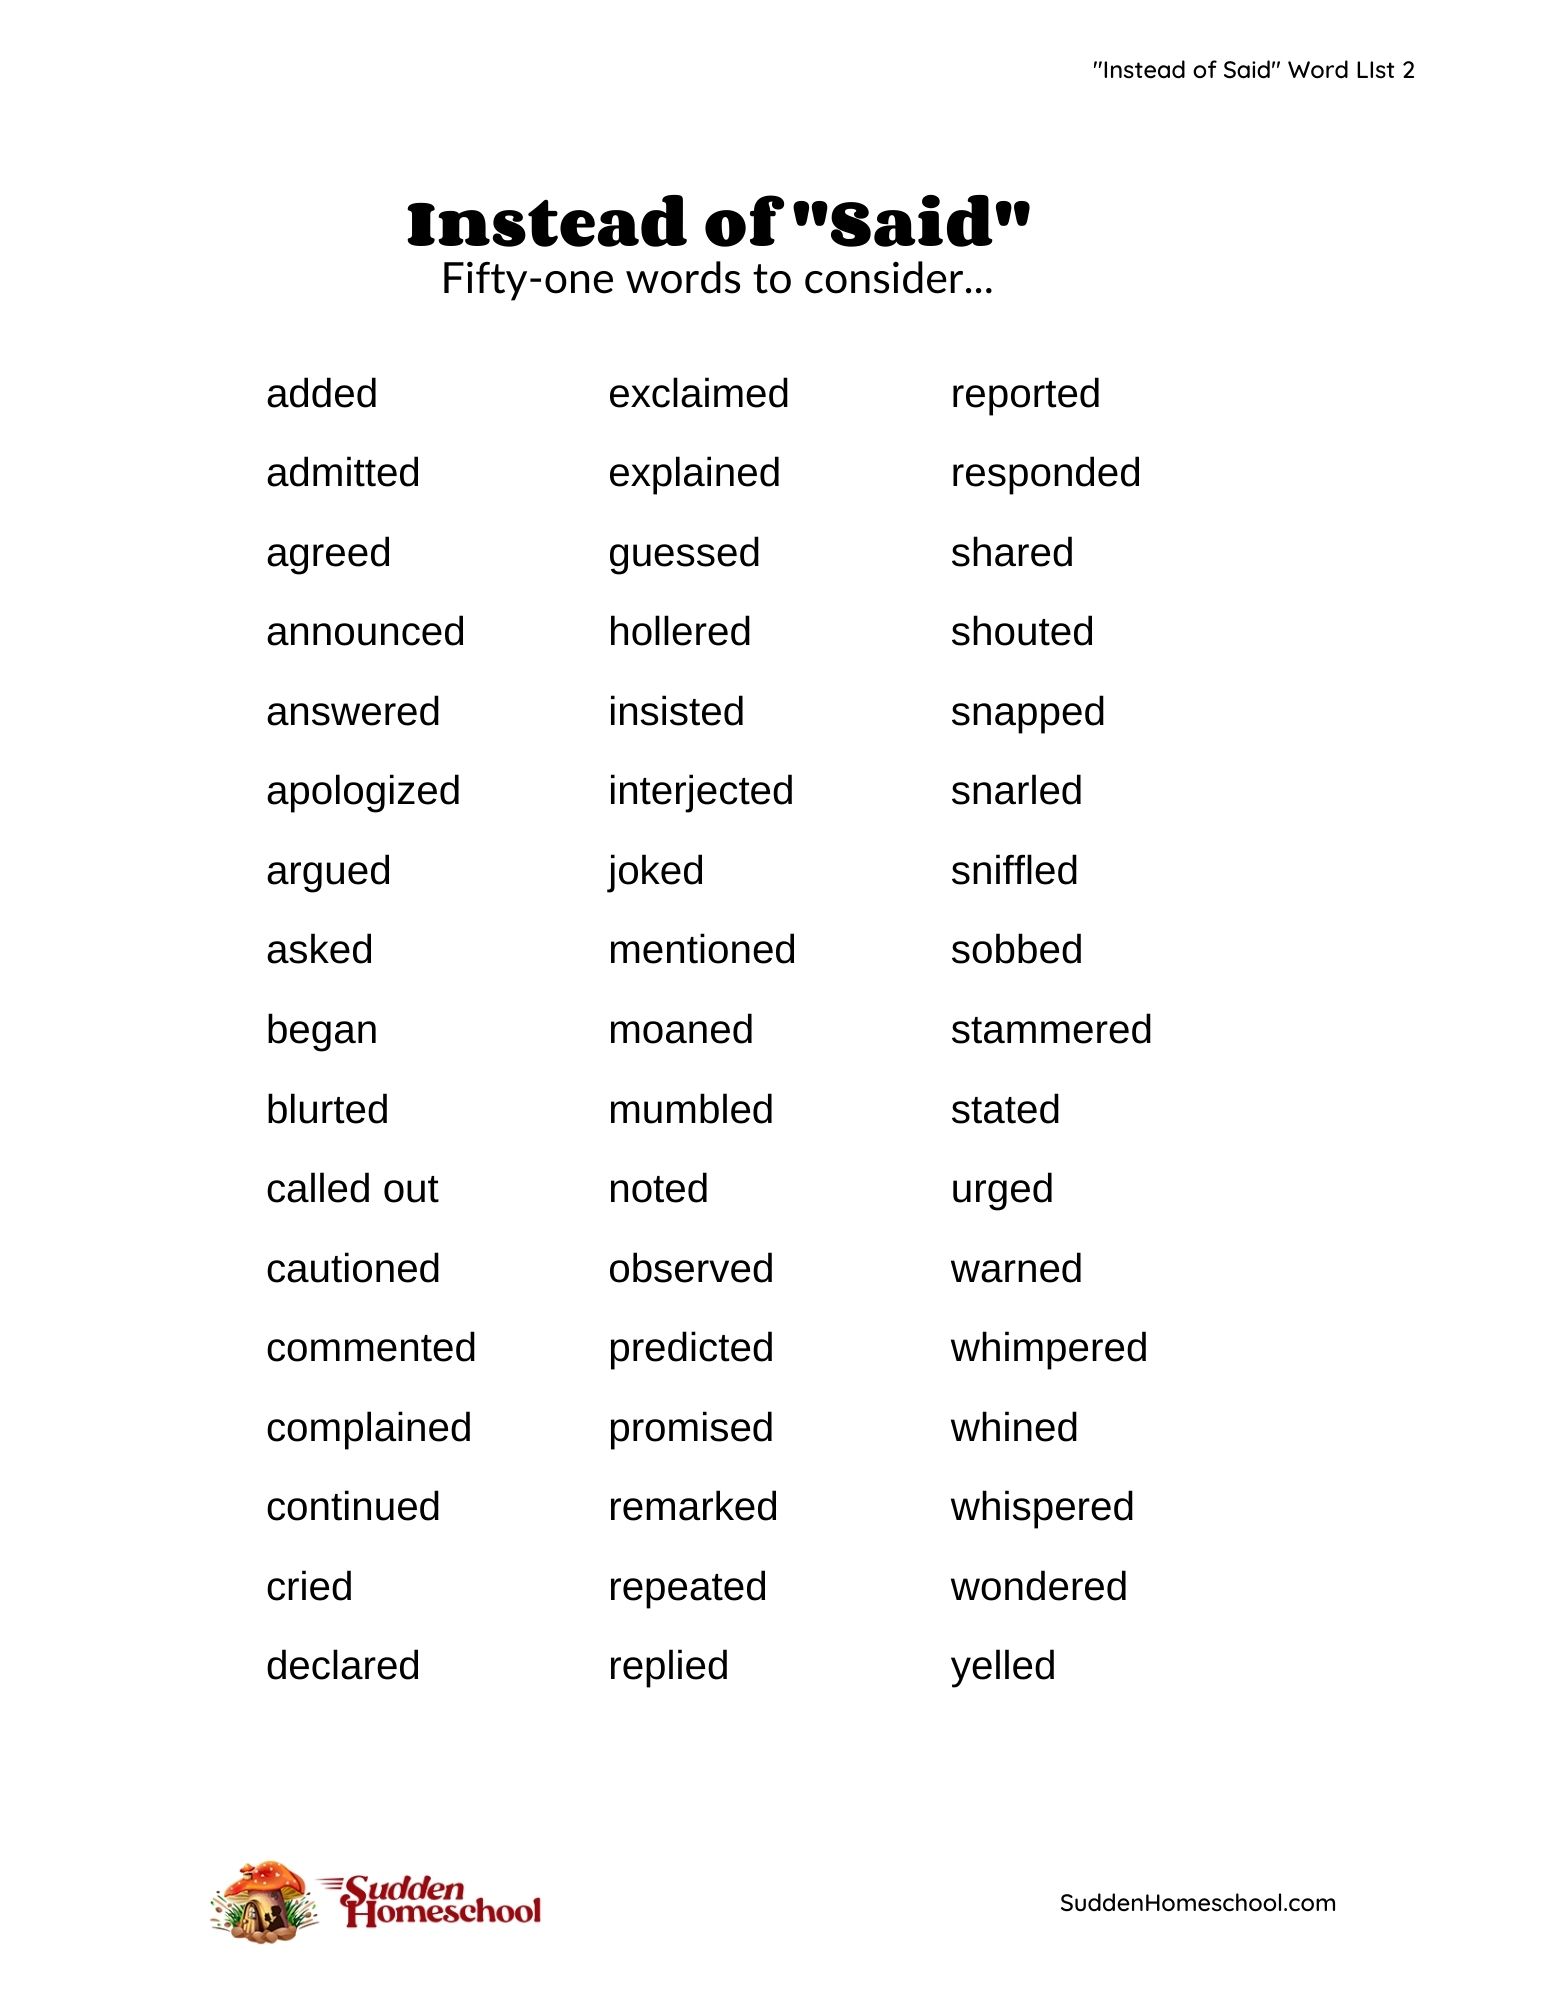 instead-of-said-lesson-plan-and-word-lists-sudden-homeschool